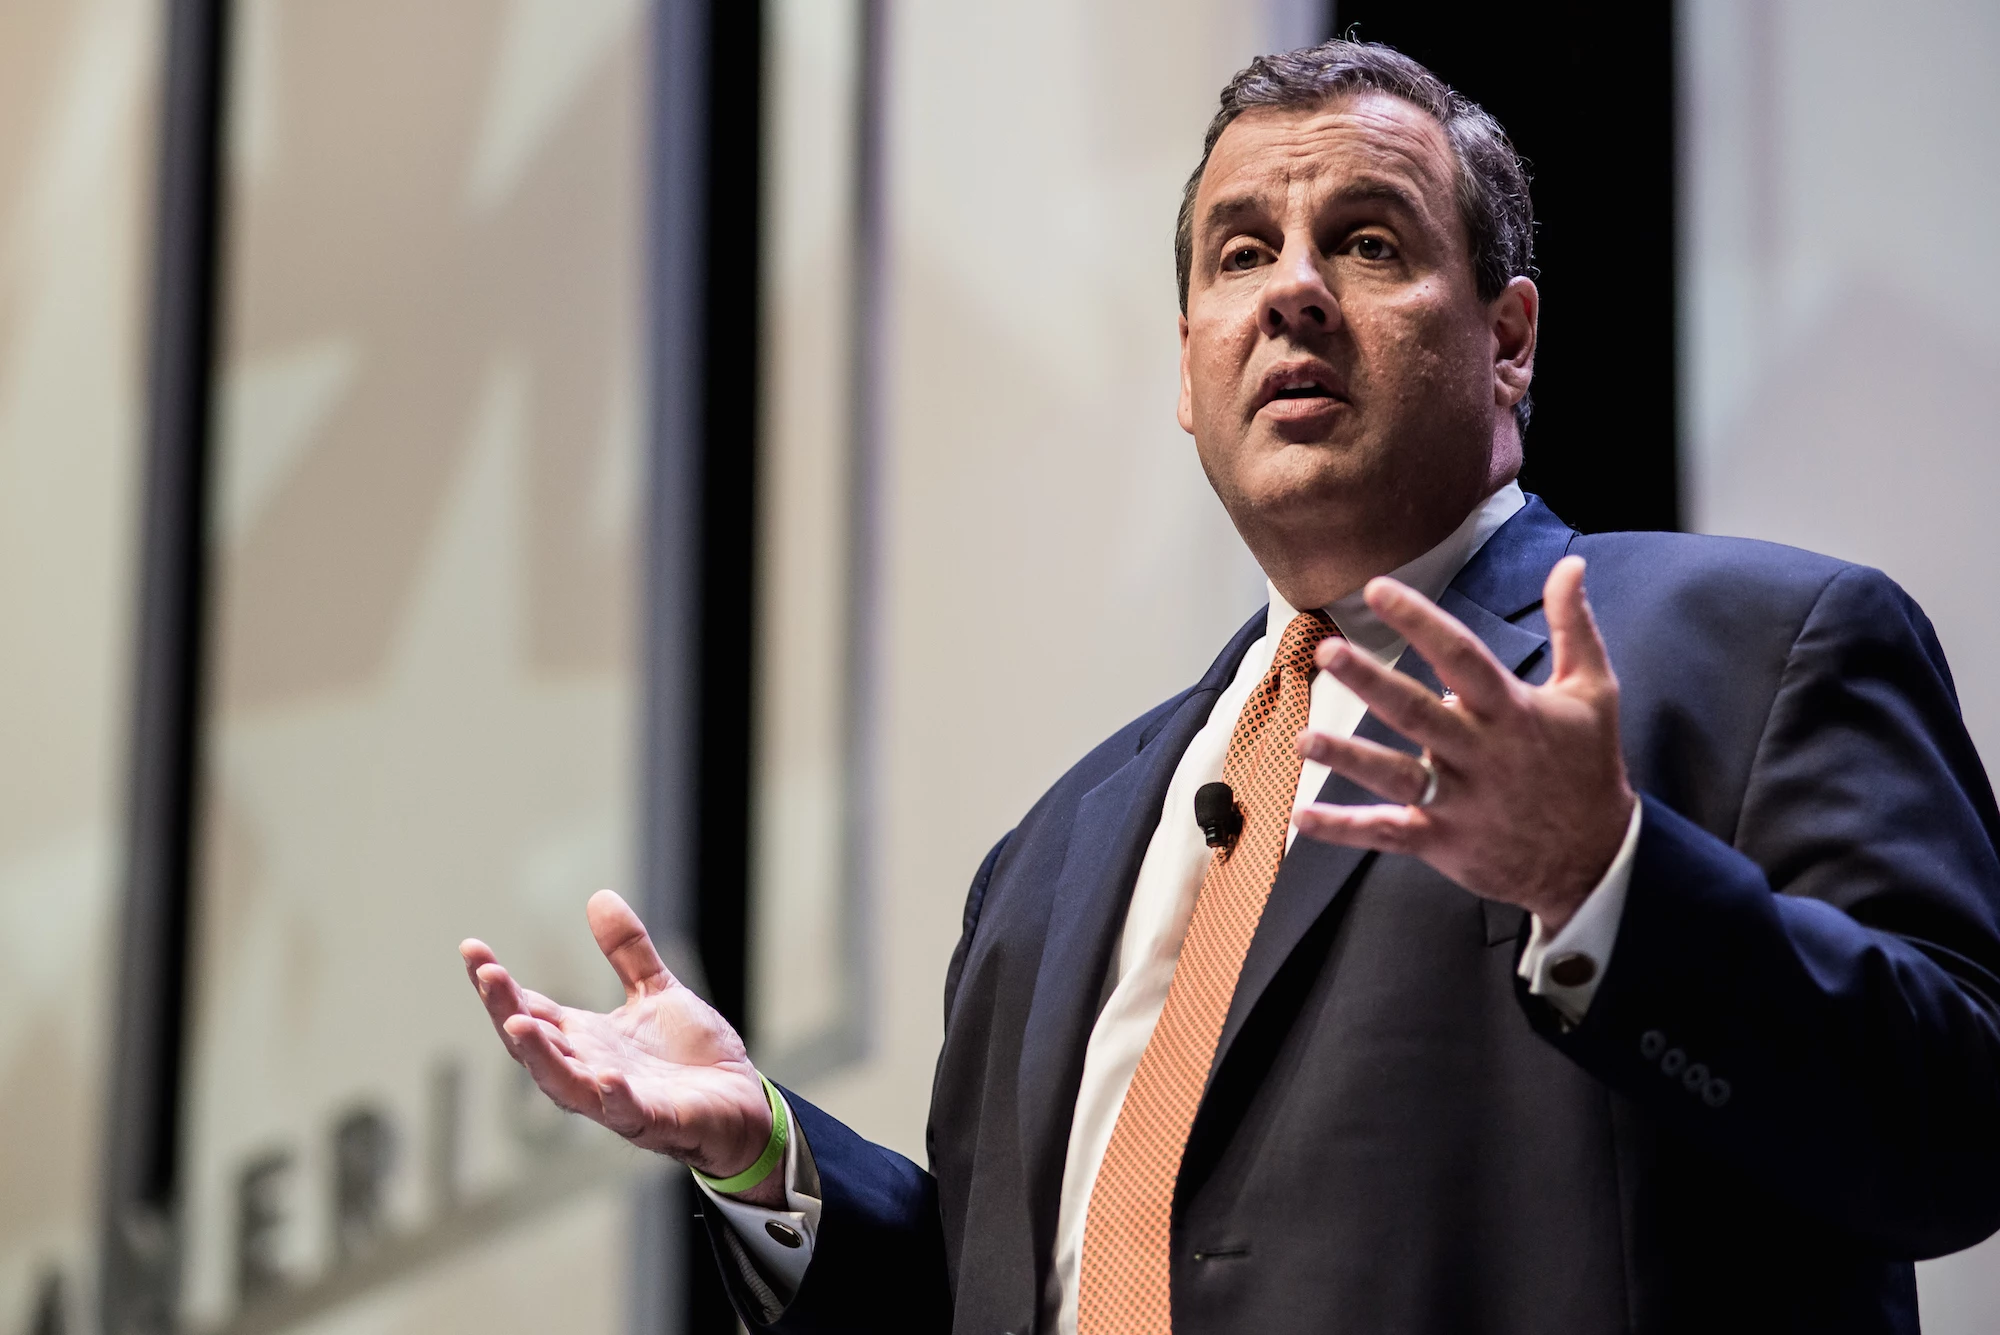 Christie's Approval Rating In The Tank As He Delivers S...